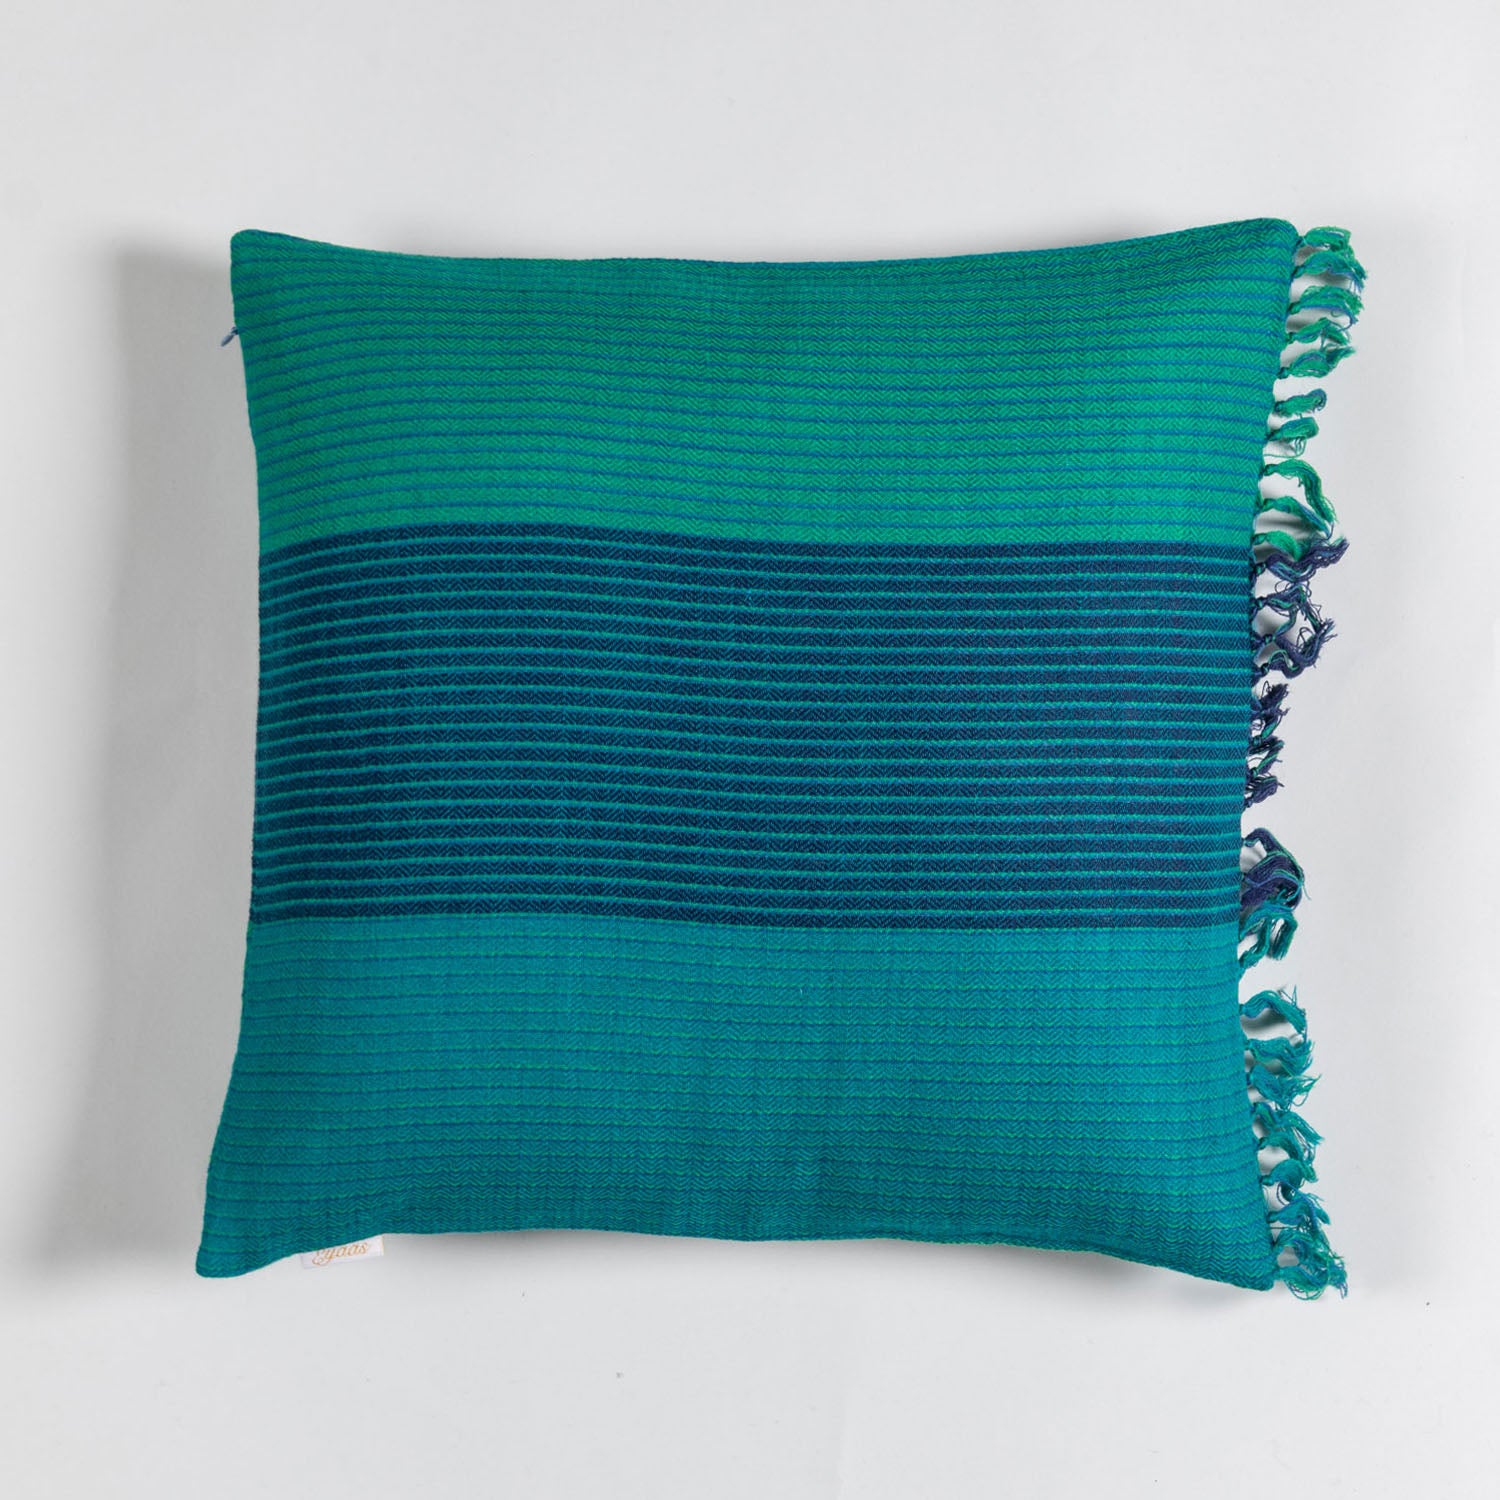 Handwoven Upcycled Turquoise & Blue Wool Cushion Cover - 16x16